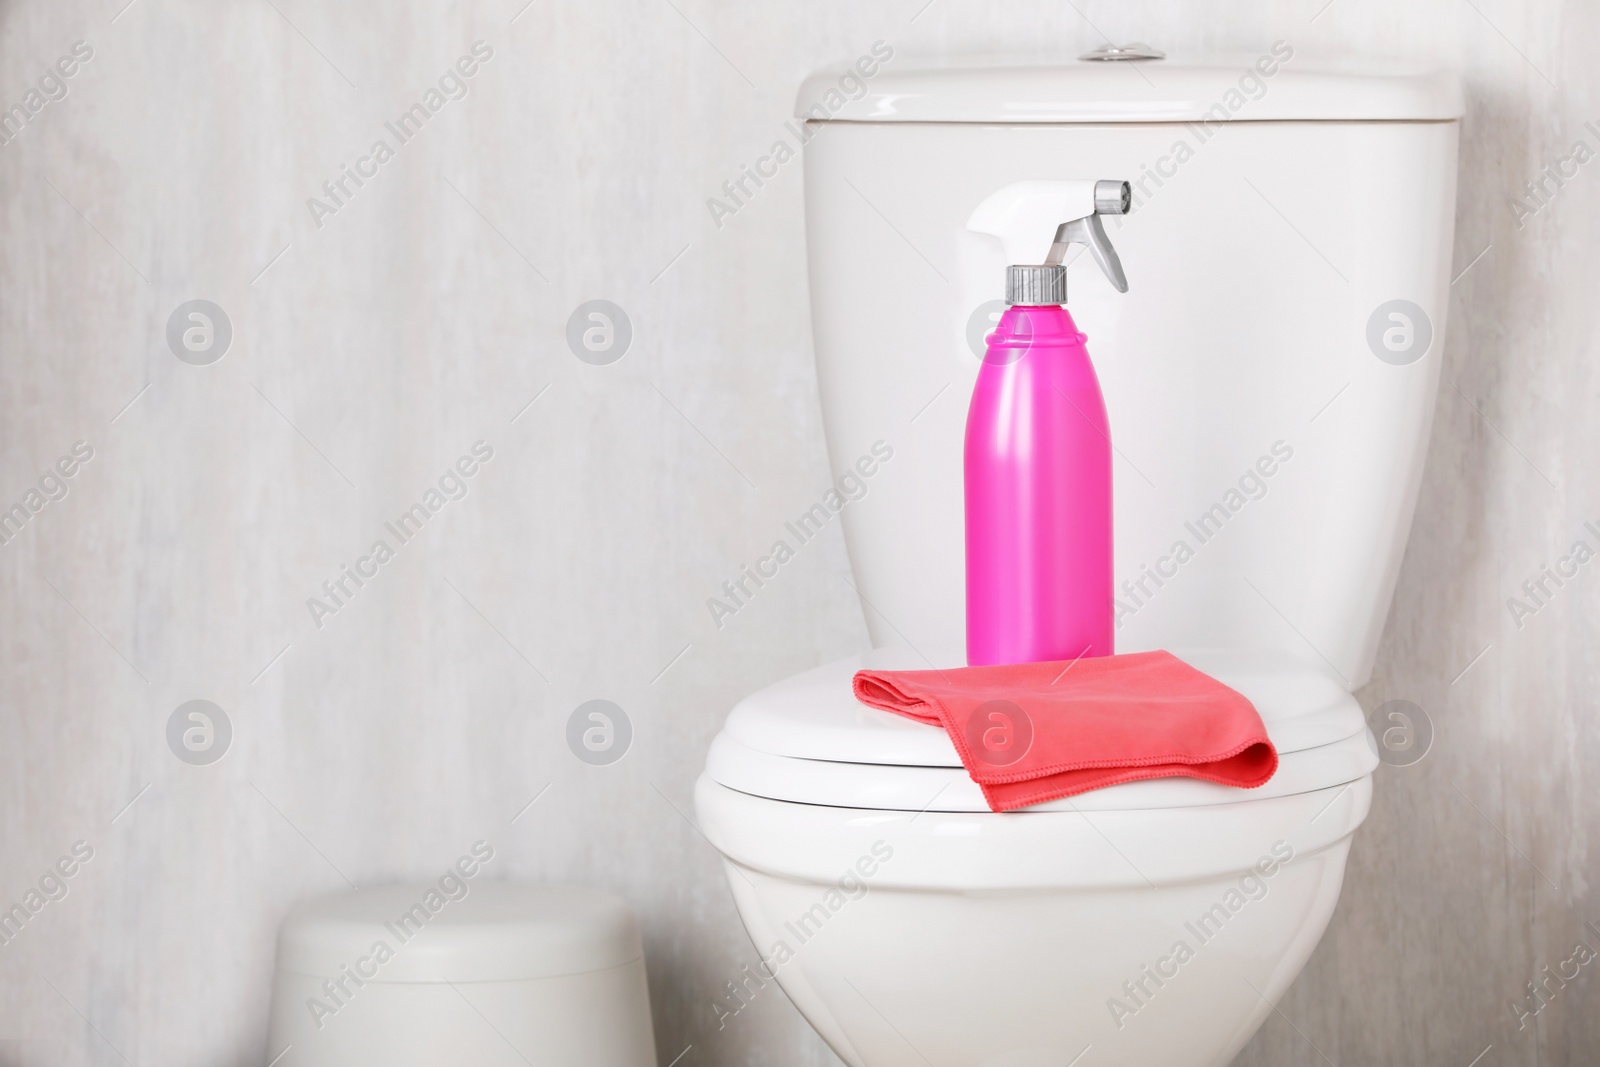 Photo of Spray bottle and rag on toilet bowl indoors. Cleaning supplies